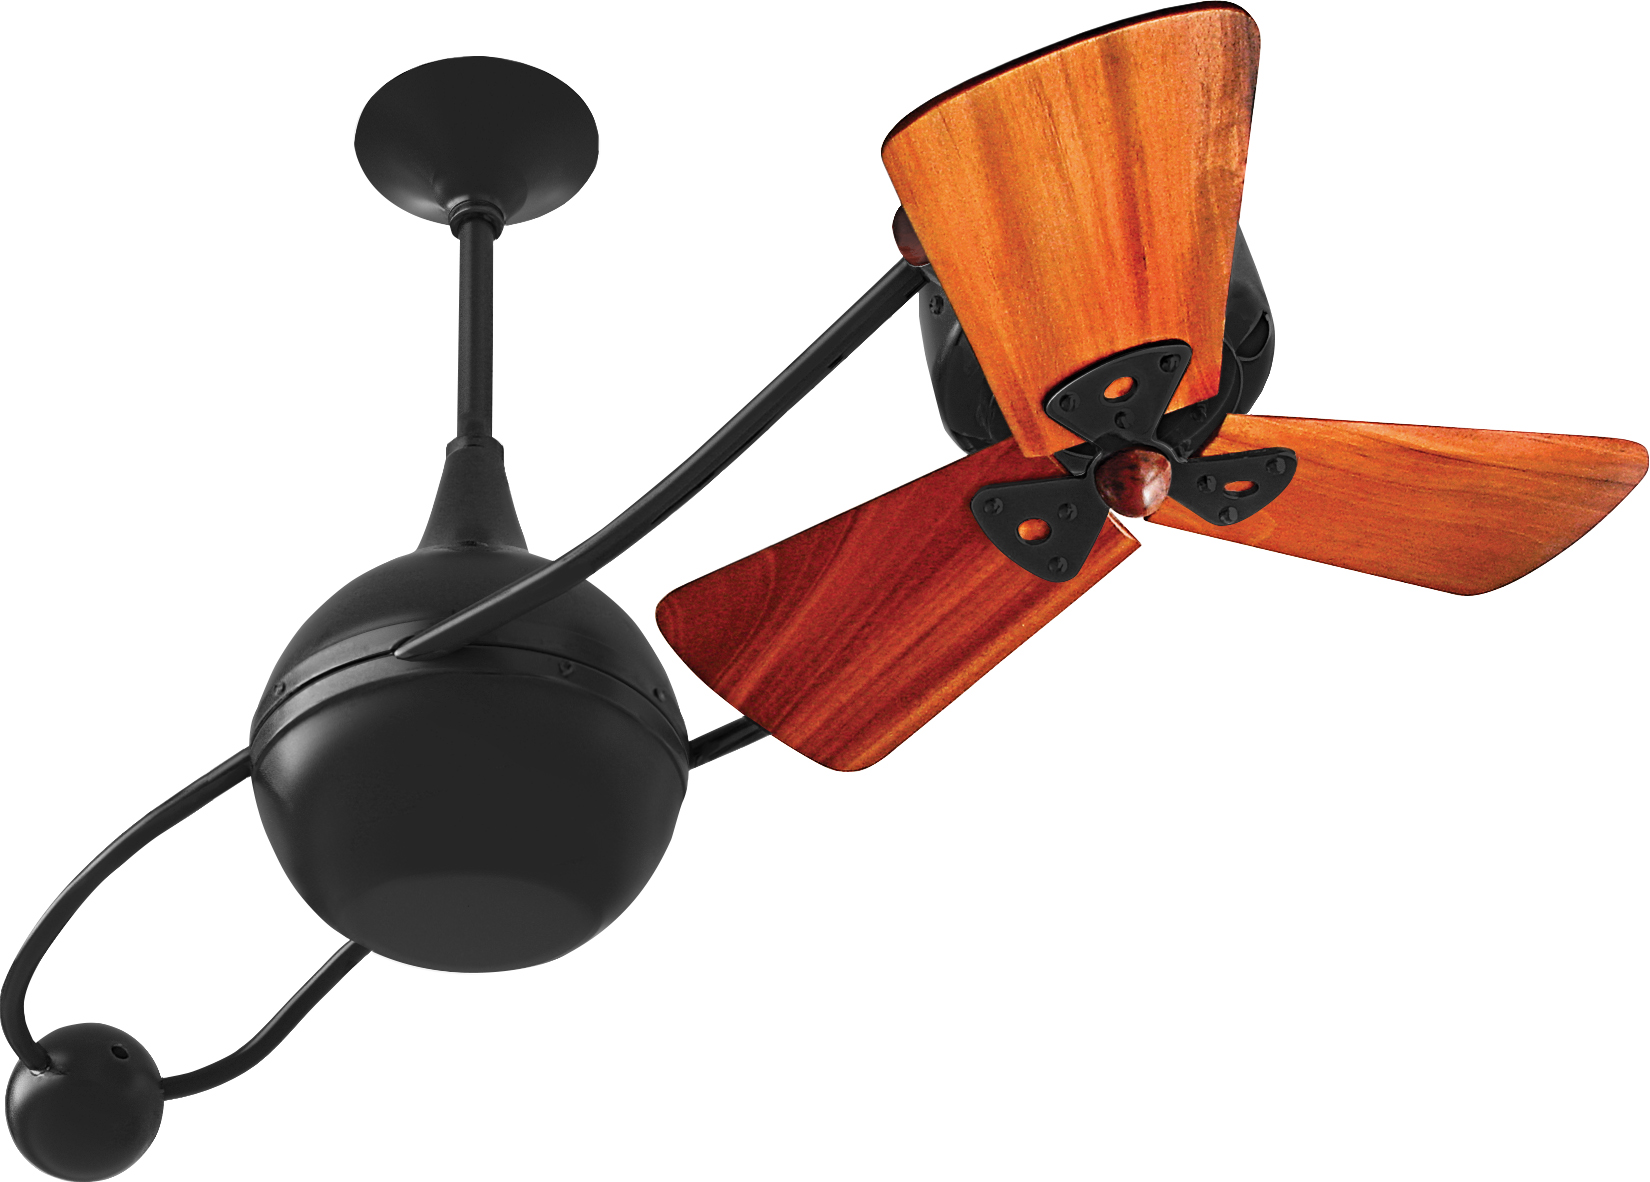 Brisa 2000 ceiling fan in Black finish with Solid Mahogany Blade